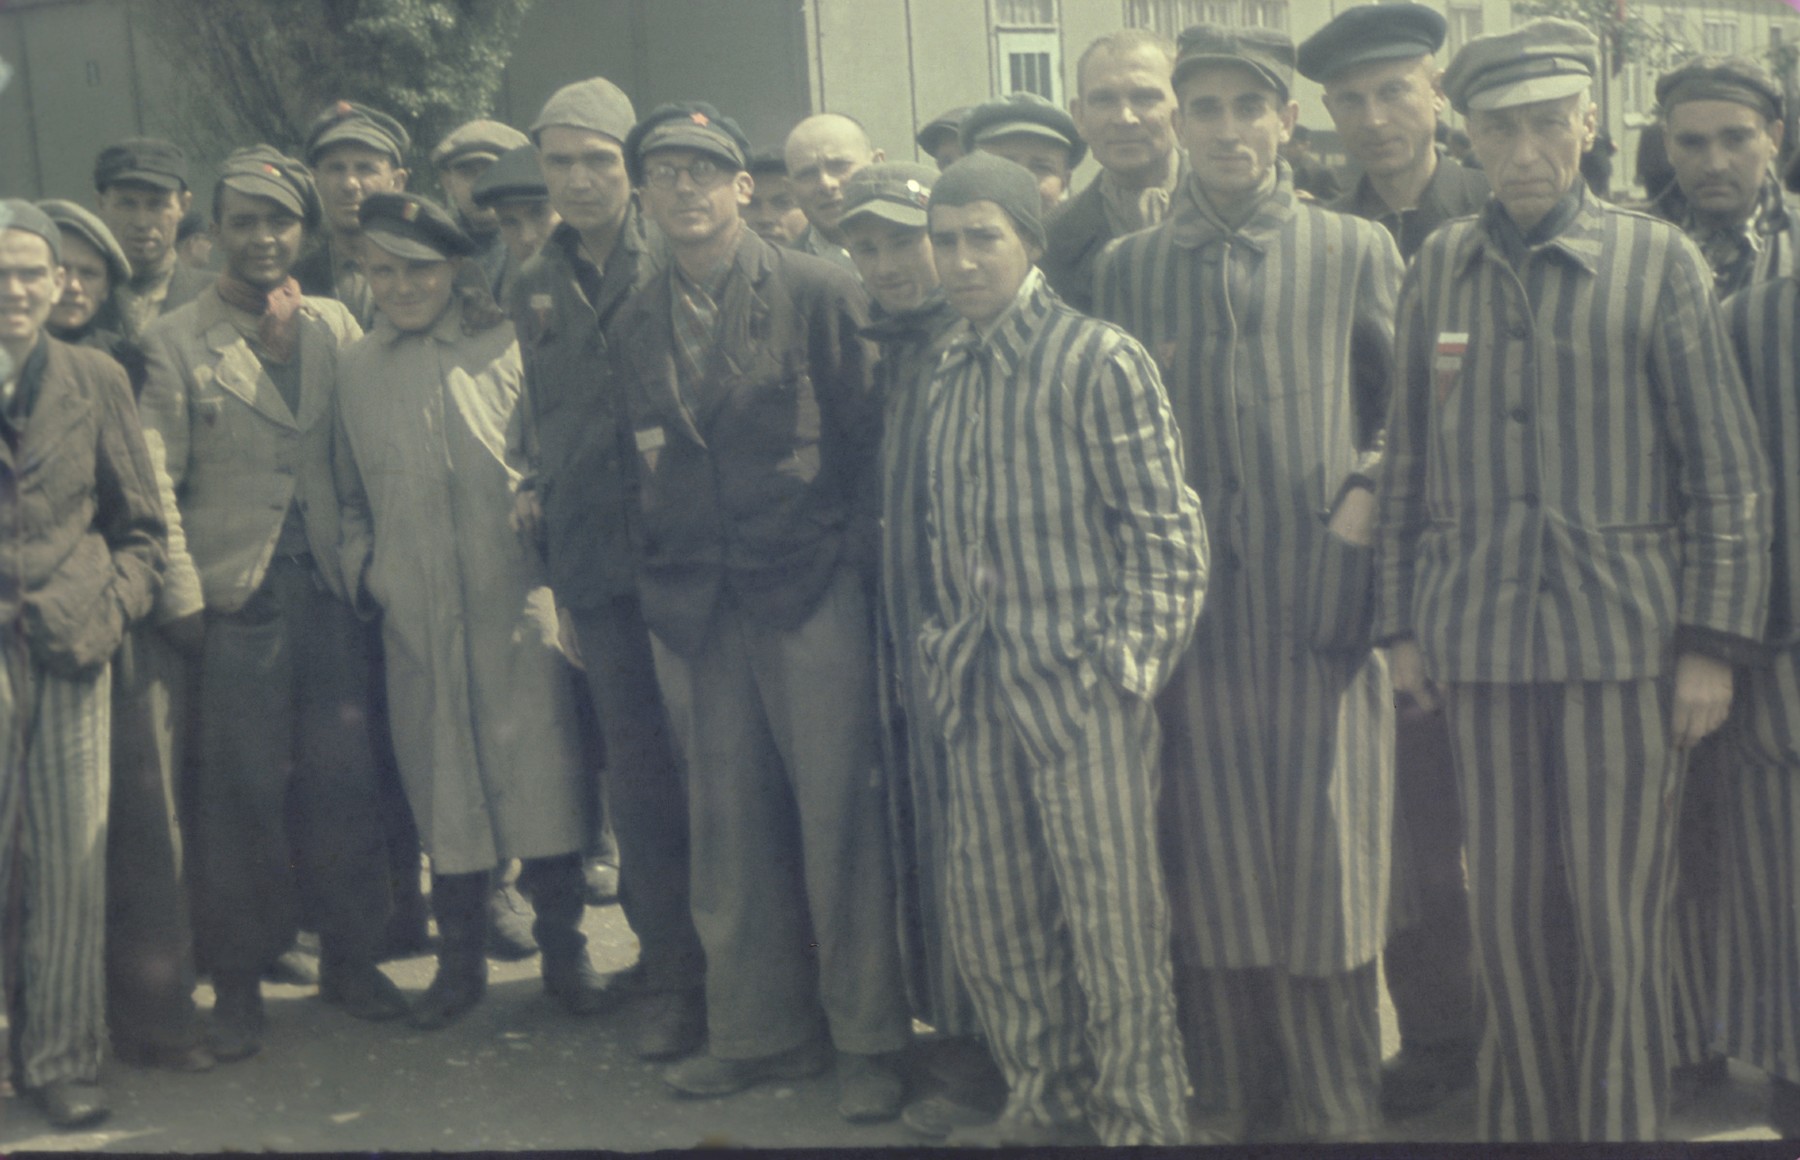 Group portrait of former political prisoners in the newly liberated Dachau concentration camp.

Among those pictured is Johny Voste, wearing a red scarf.